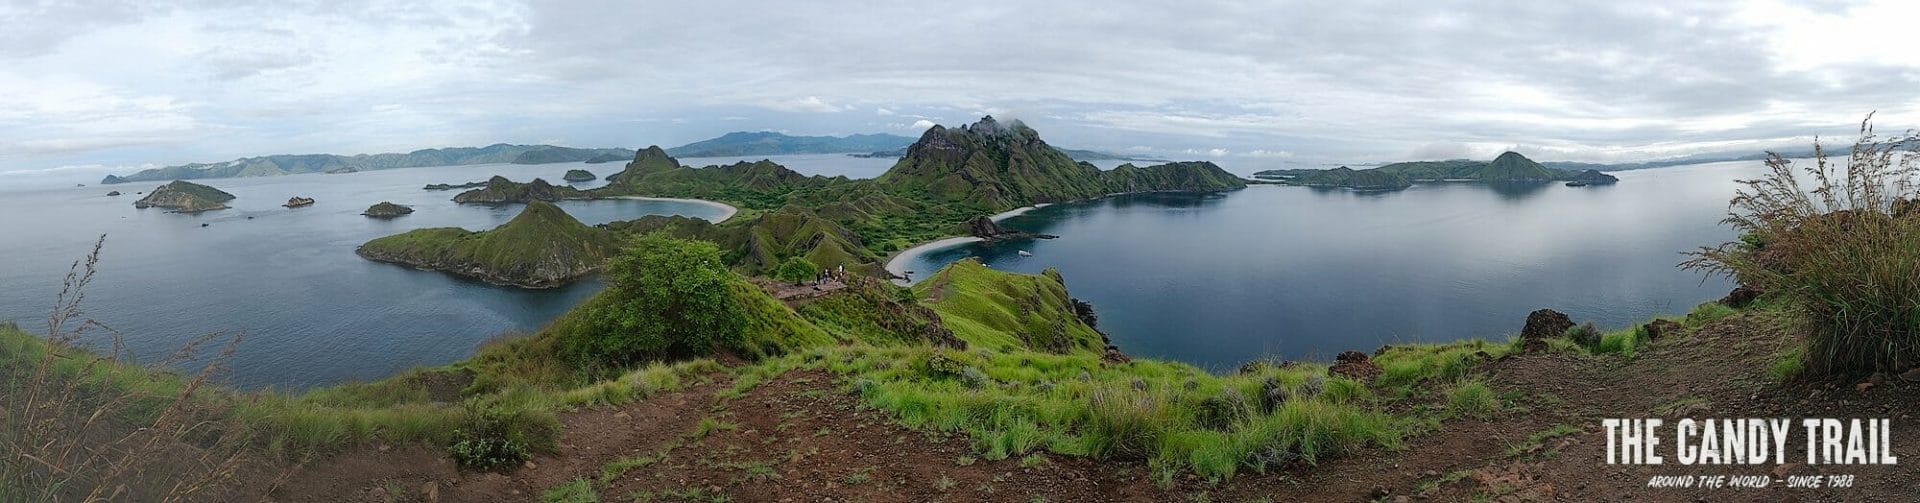 Classic Komodo Island Park view from Rinca Island high point in the early morning during the Monsoon season.